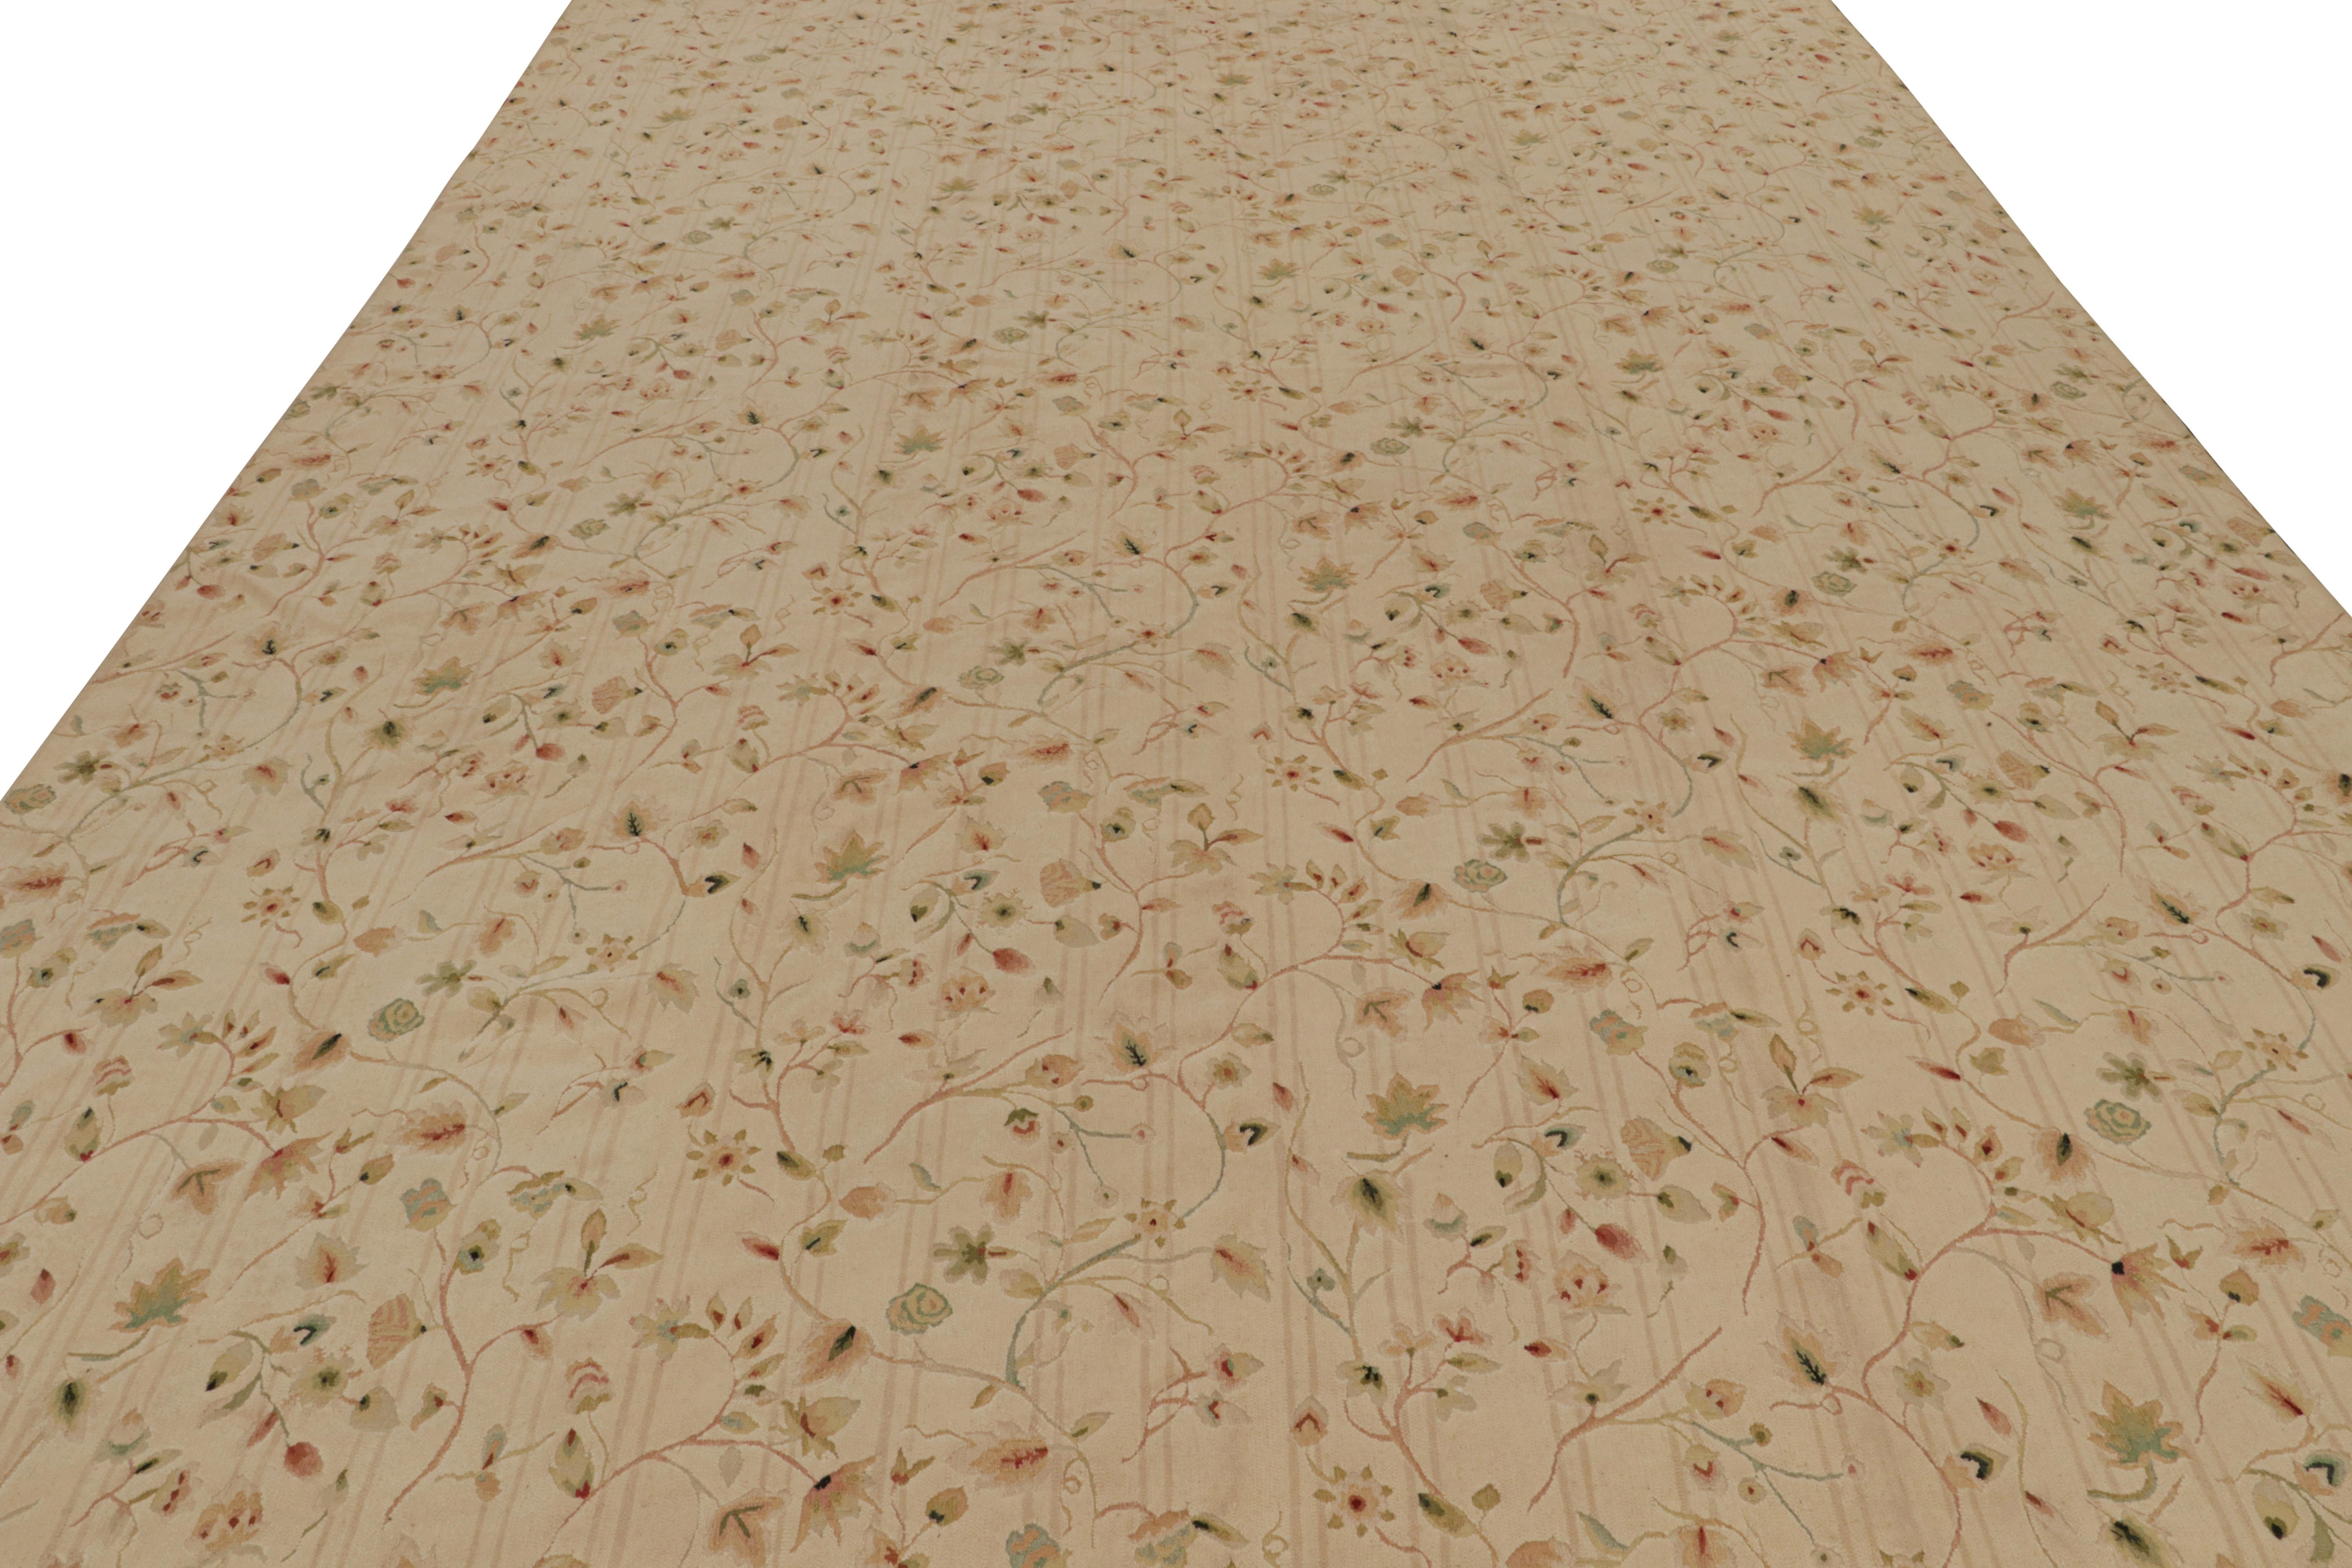 Modern Rug & kilim’s European Rug in Beige, with Green and Red Floral Patterns For Sale